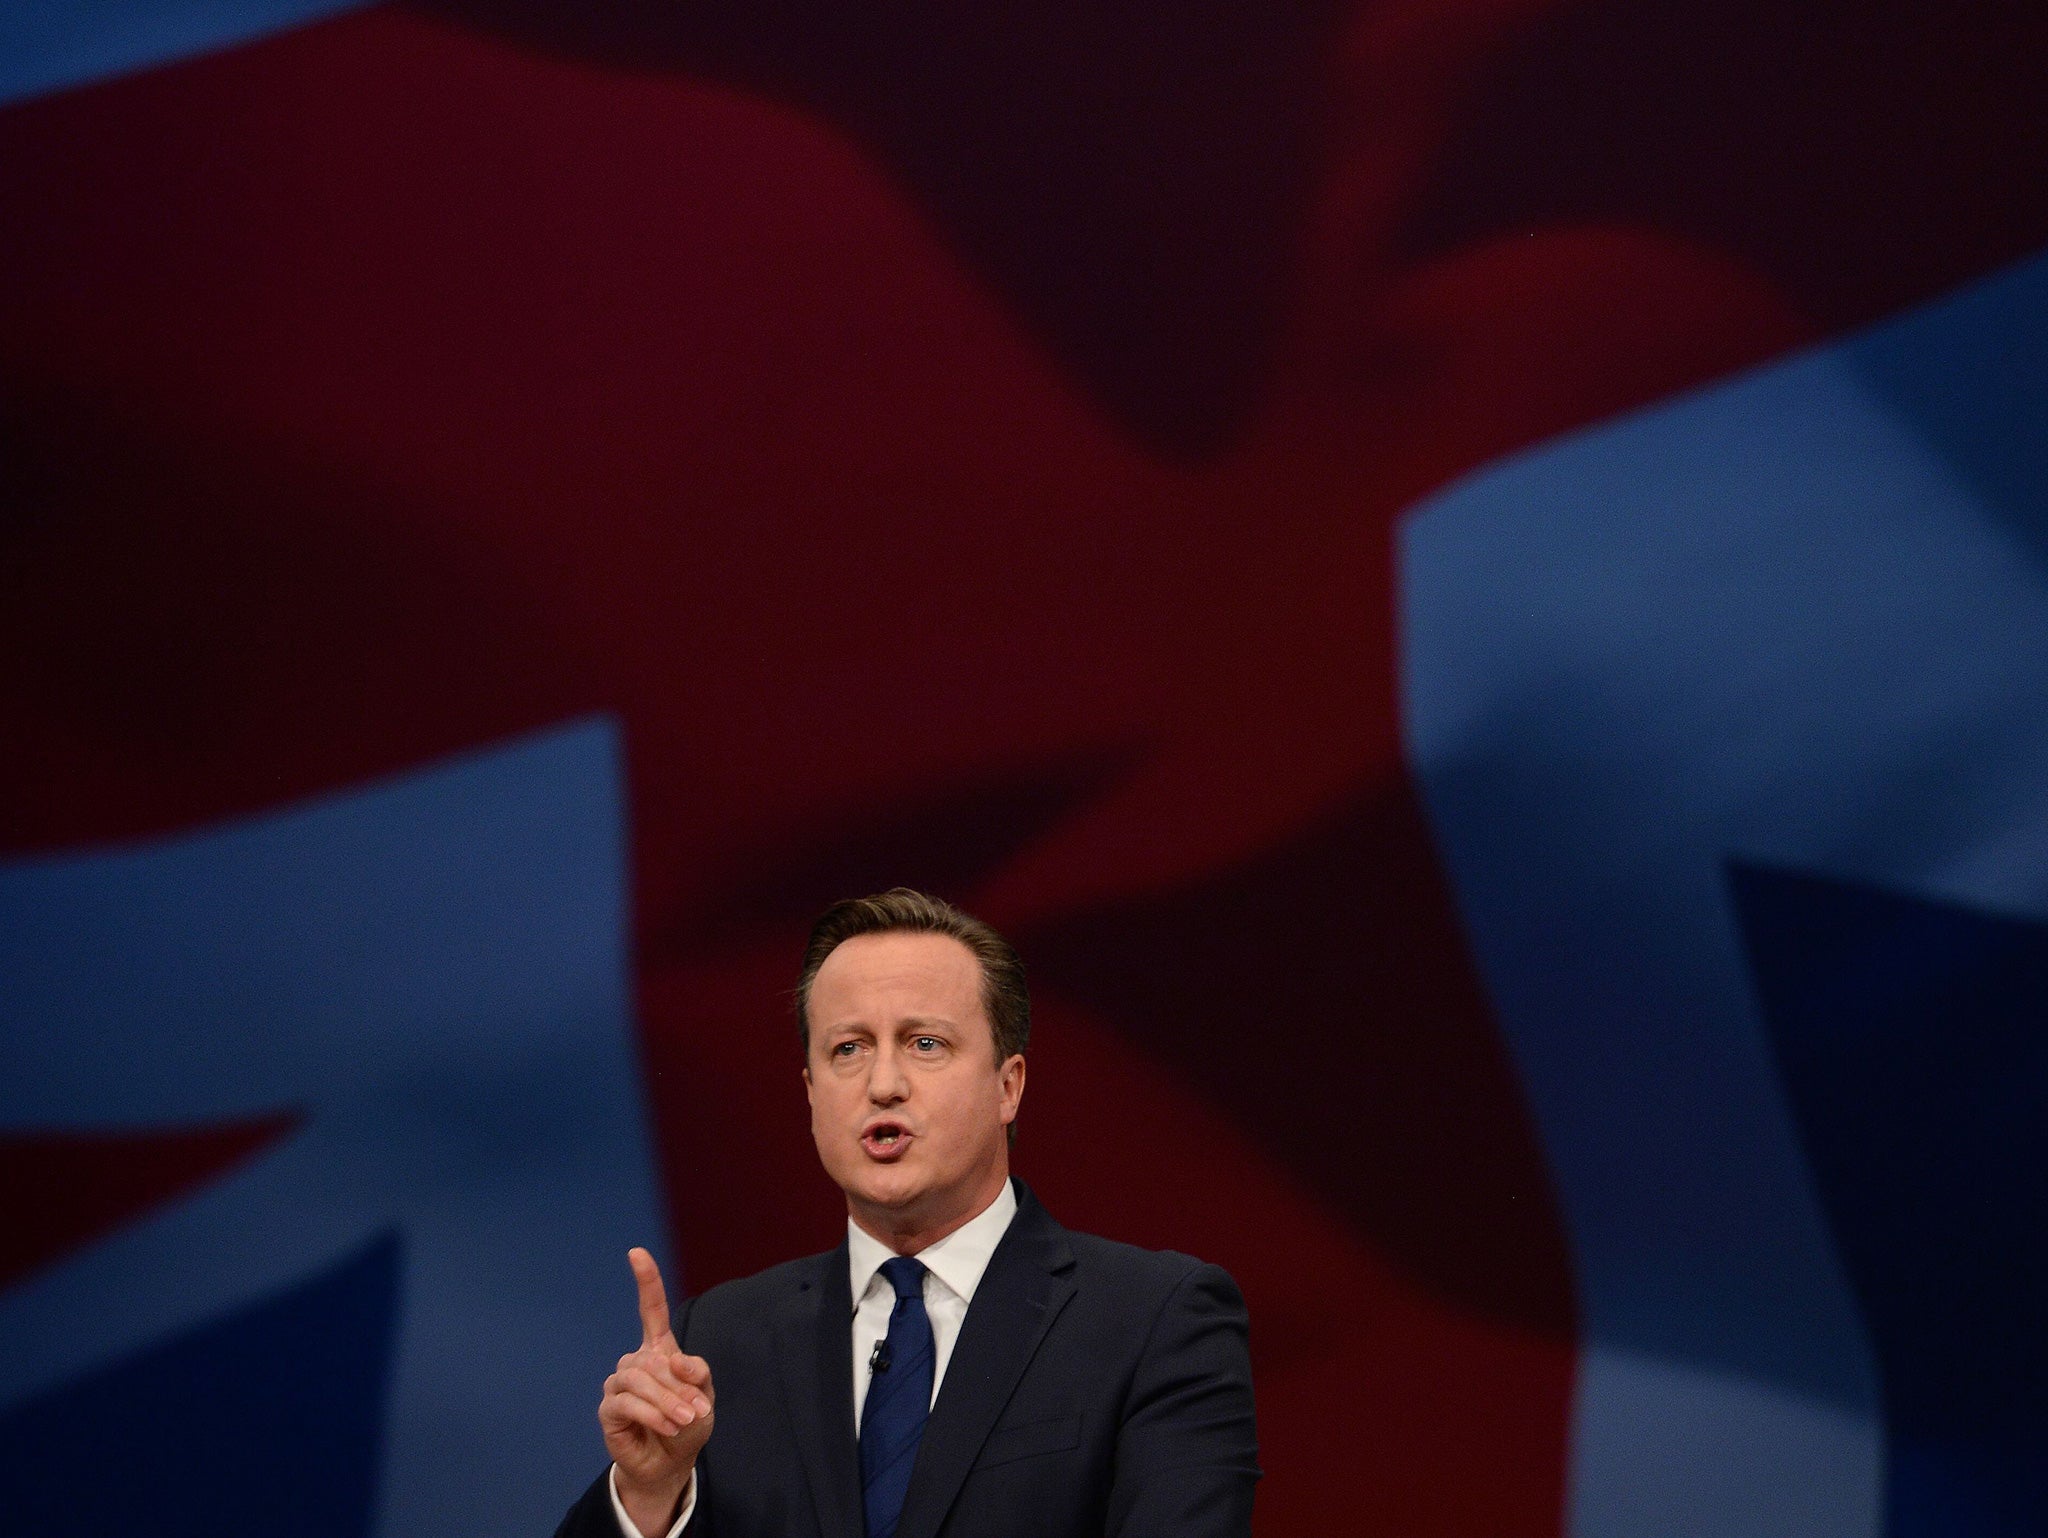 The PM said local authority schools would be a thing of the past